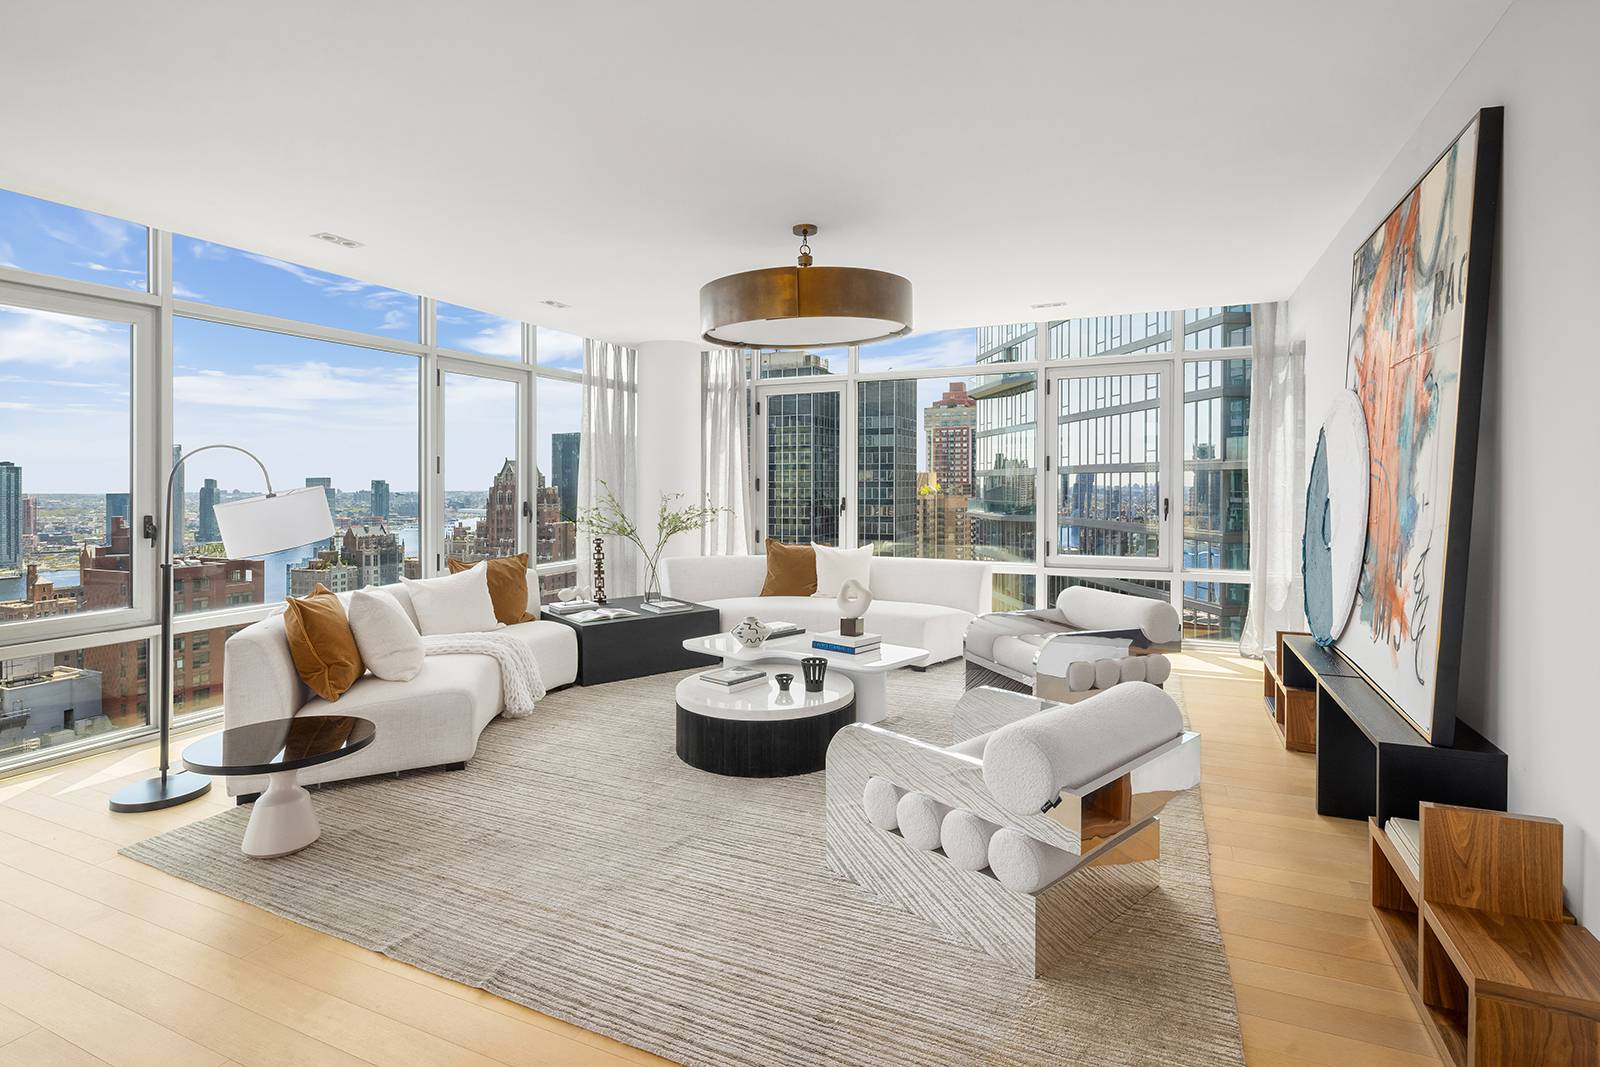 Contemporary elegance and Midtown splendor collide in this expansive full floor condo with 3 bedrooms, 3.